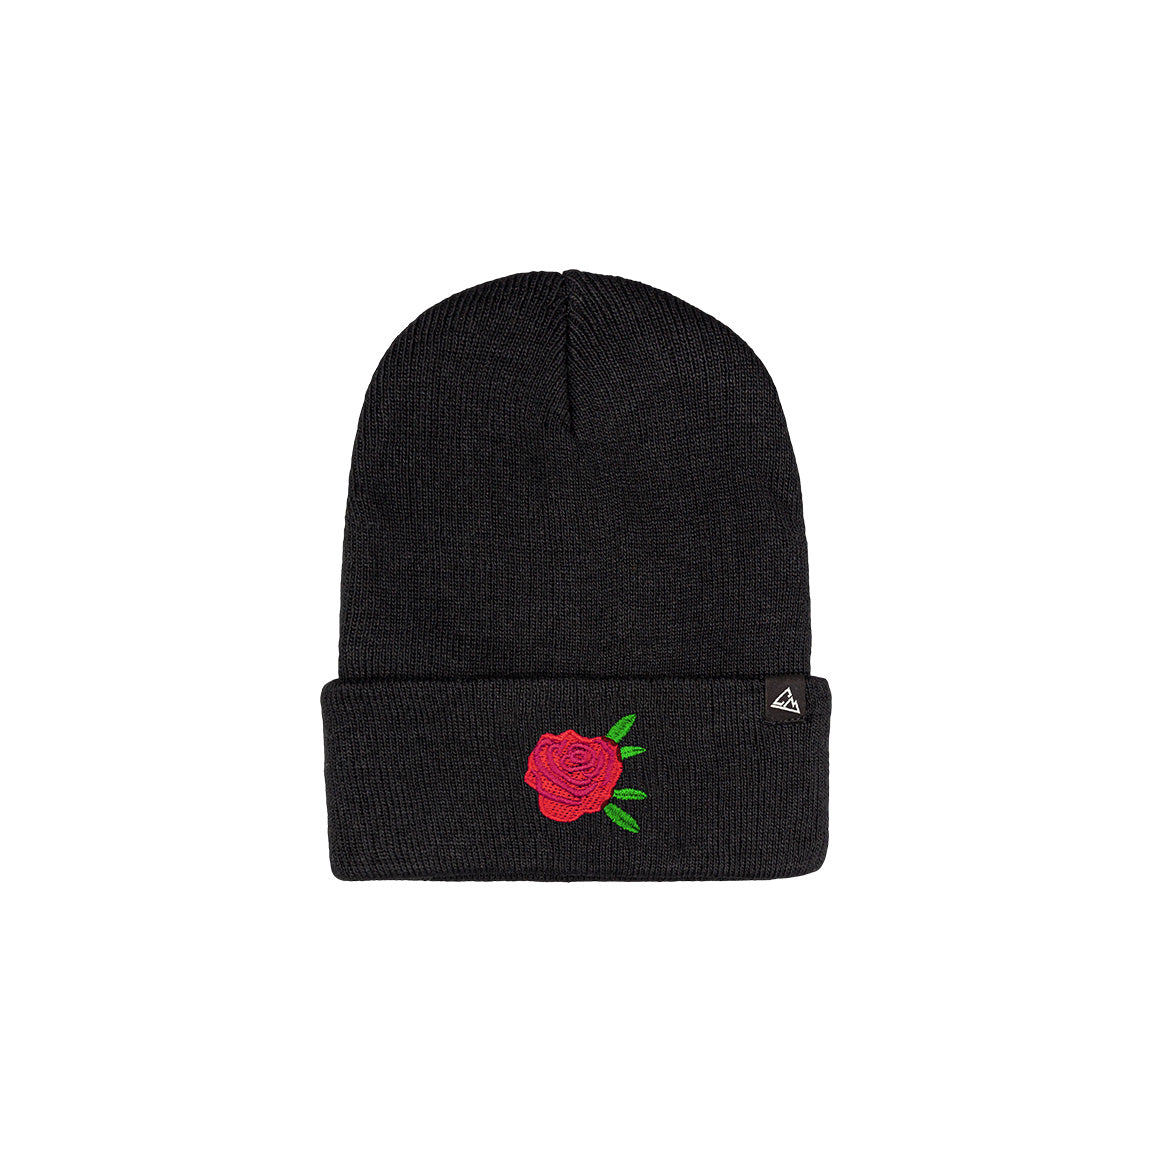 A black ribbed beanie showcasing a red rose patch on the fold and a small triangular logo on the side.